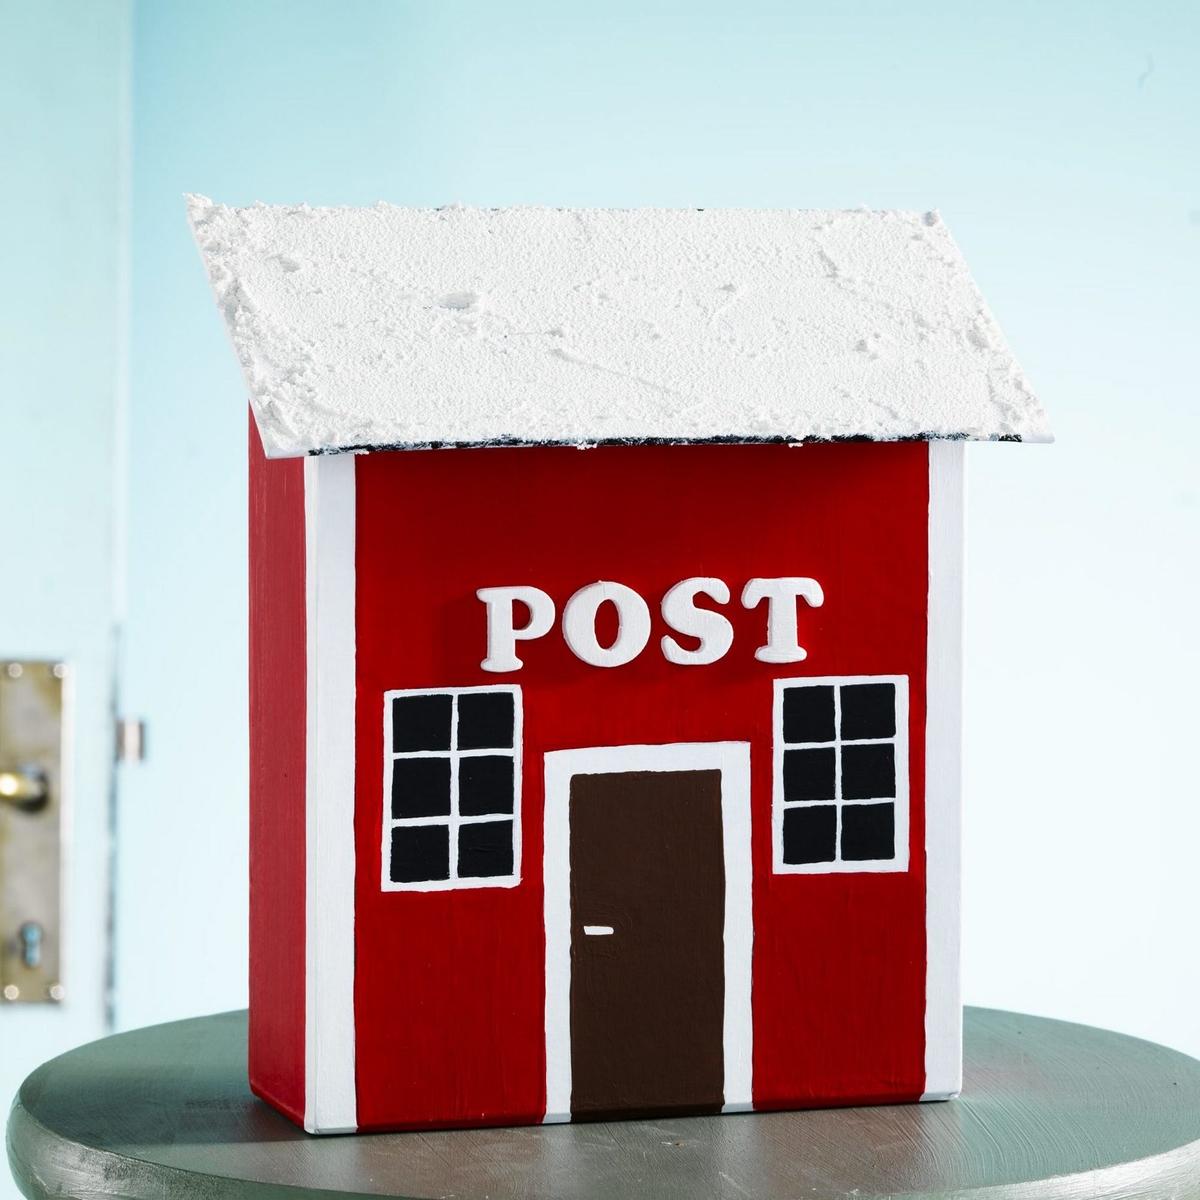 Paint an indoor letter box